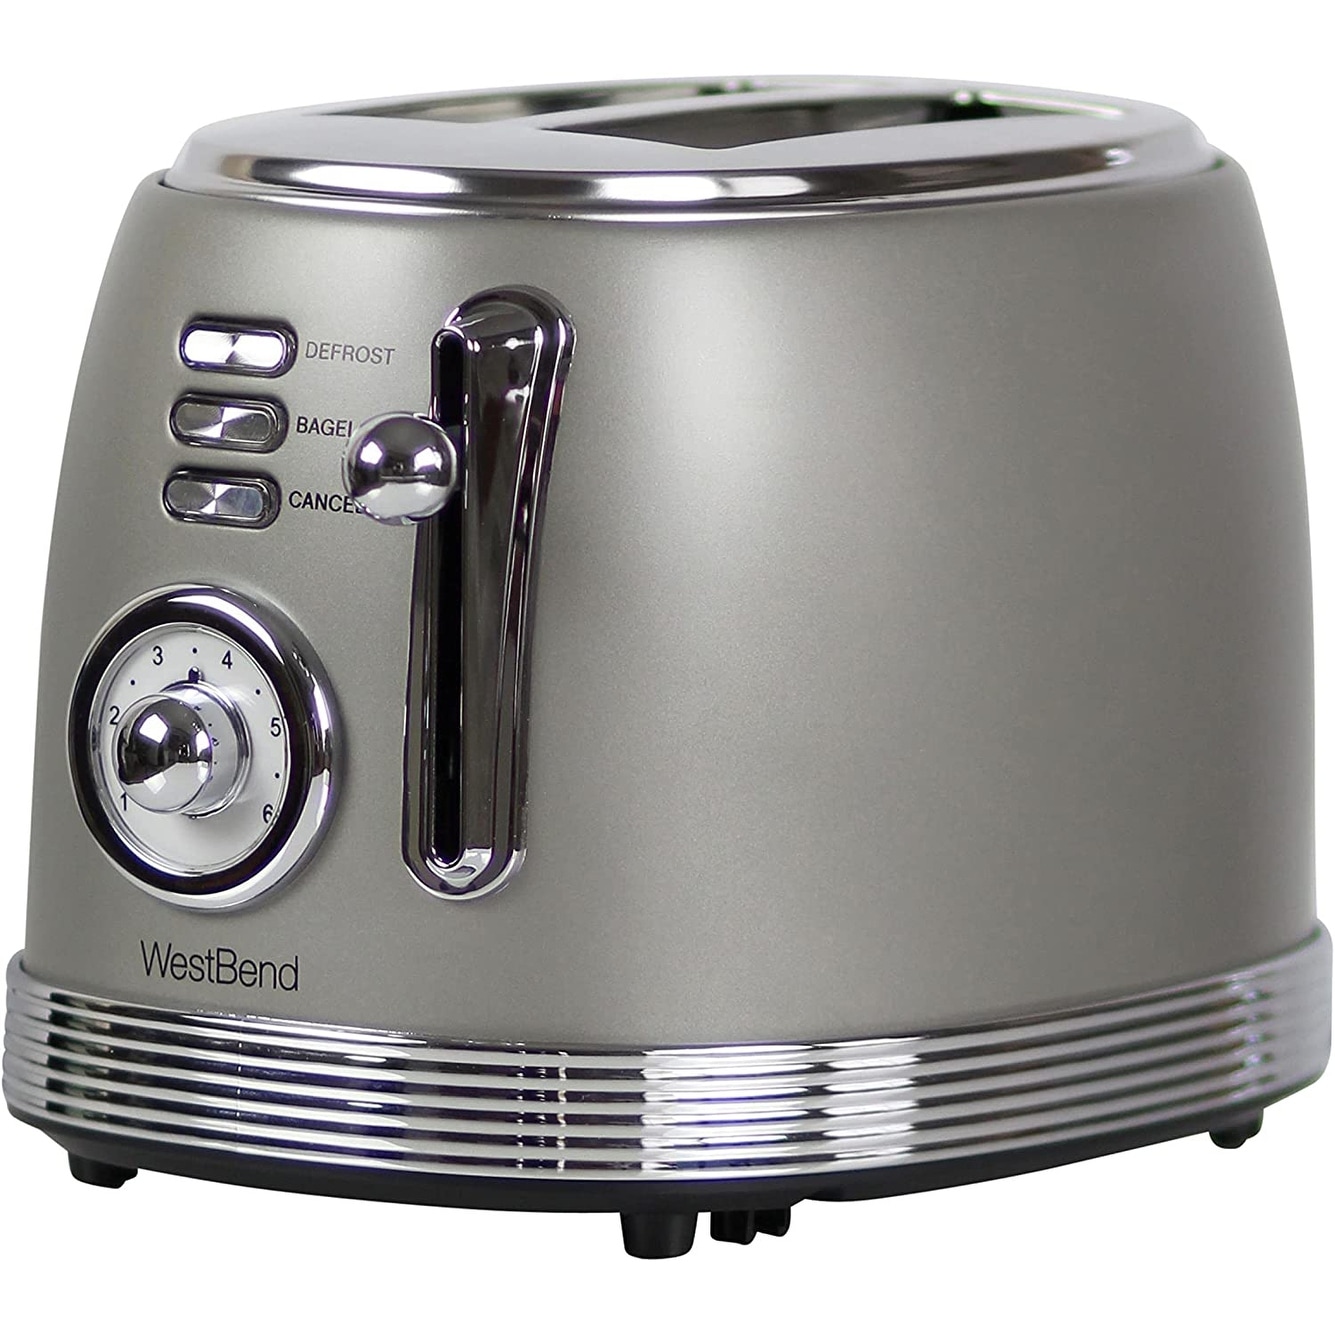 https://ak1.ostkcdn.com/images/products/is/images/direct/98ed40d9f0cc06676e8e9cdb5d566545afa5fde3/West-Bend-Toaster-2-Slice-Retro-Styled-Stainless-Steel-with-4-Functions-and-6-Shade-Settings%2C-850-Watts%2C-Gray.jpg